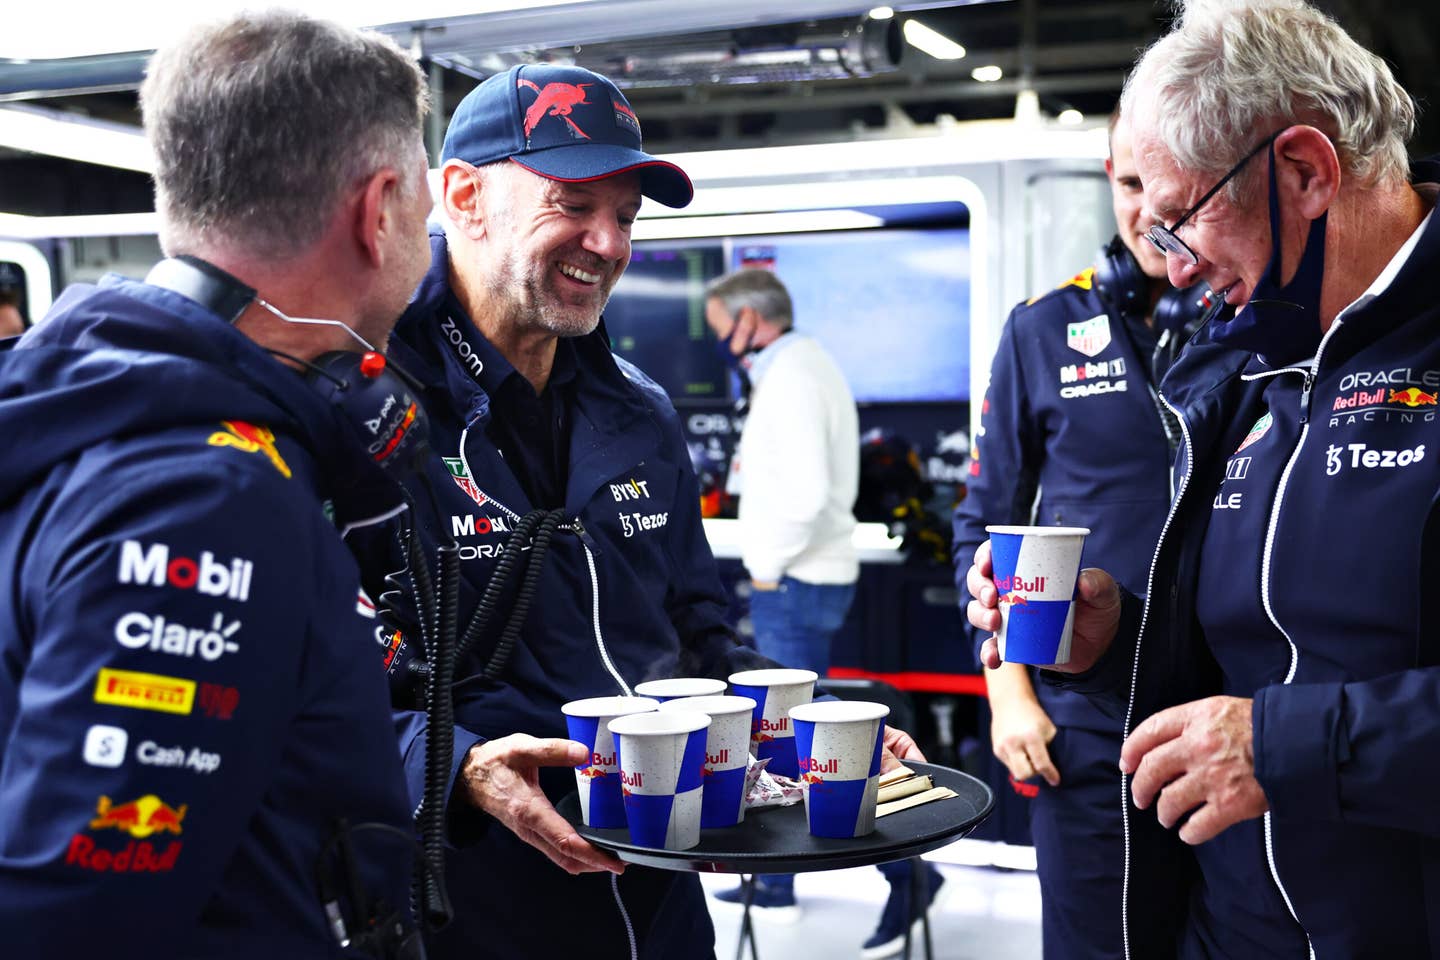 SUZUKA, JAPAN - OCTOBER 09: Adrian Newey, the Chief Technical Officer of Red Bull Racing delivers hot drinks to Red Bull Racing Team Principal Christian Horner and Red Bull Racing Team Consultant Dr Helmut Marko during a red flag delay during the F1 Grand Prix of Japan at Suzuka International Racing Course on October 09, 2022 in Suzuka, Japan. (Photo by Dan Istitene/Getty Images)